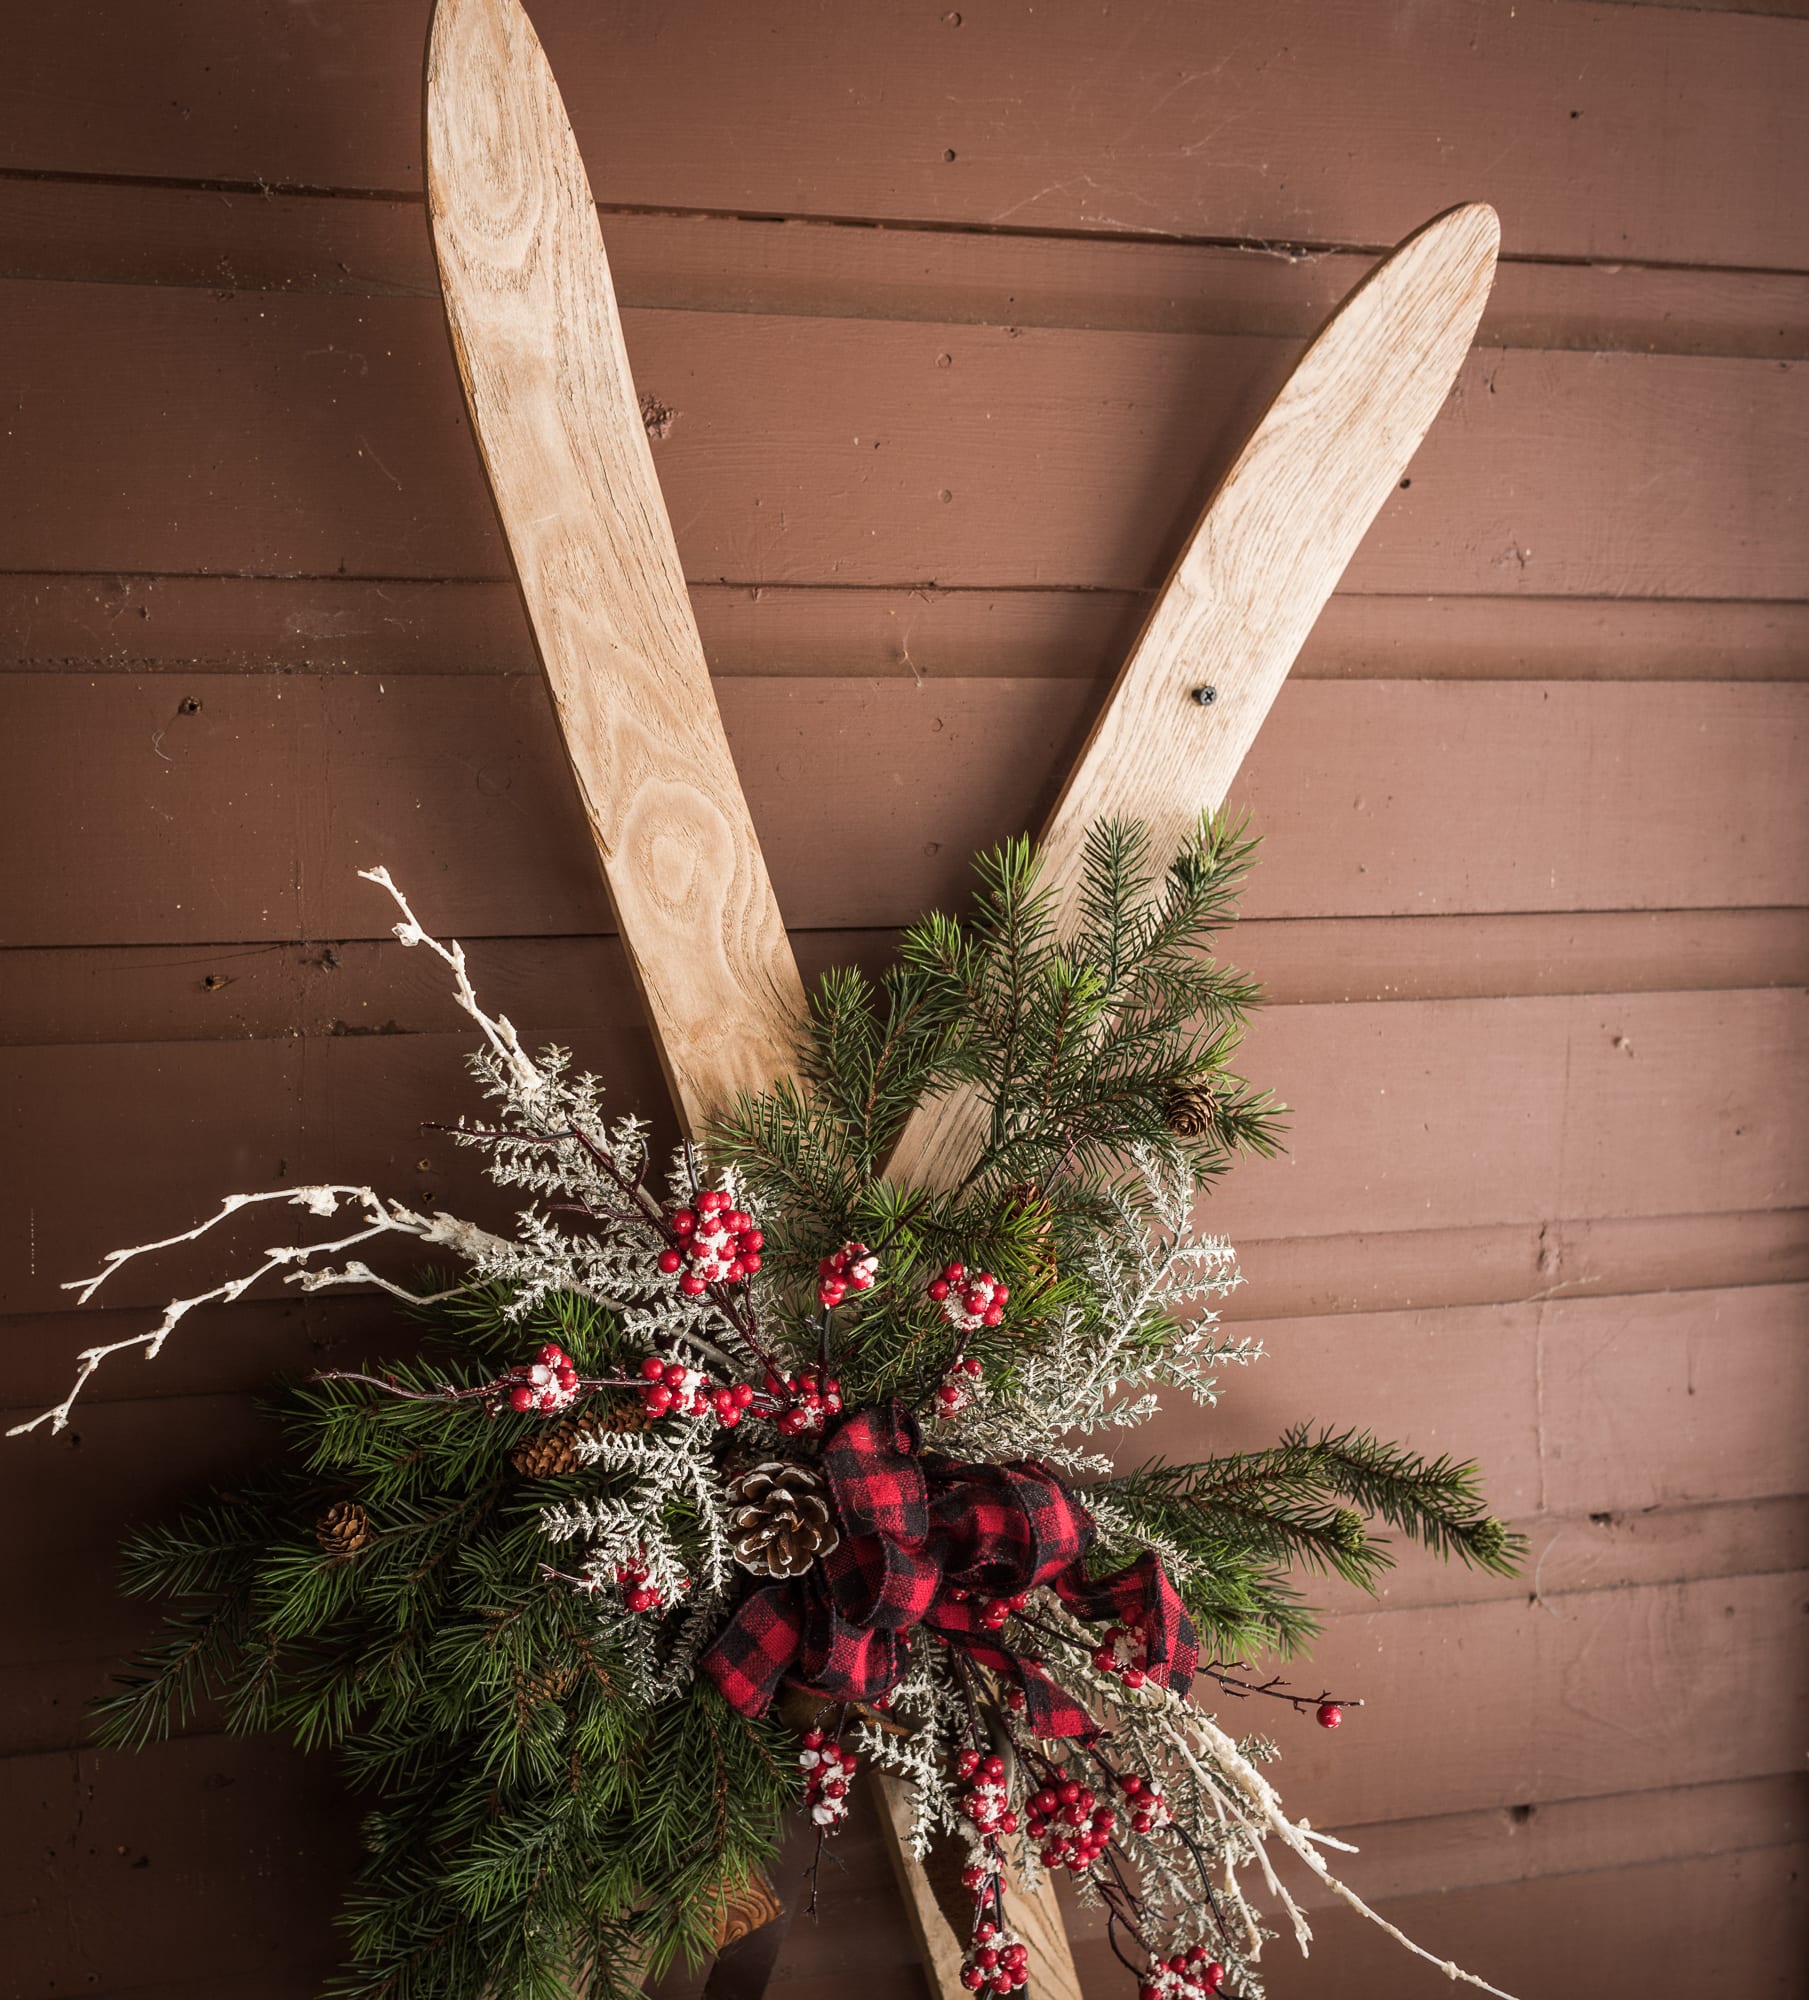 Decorative skis with Christmas decorations.